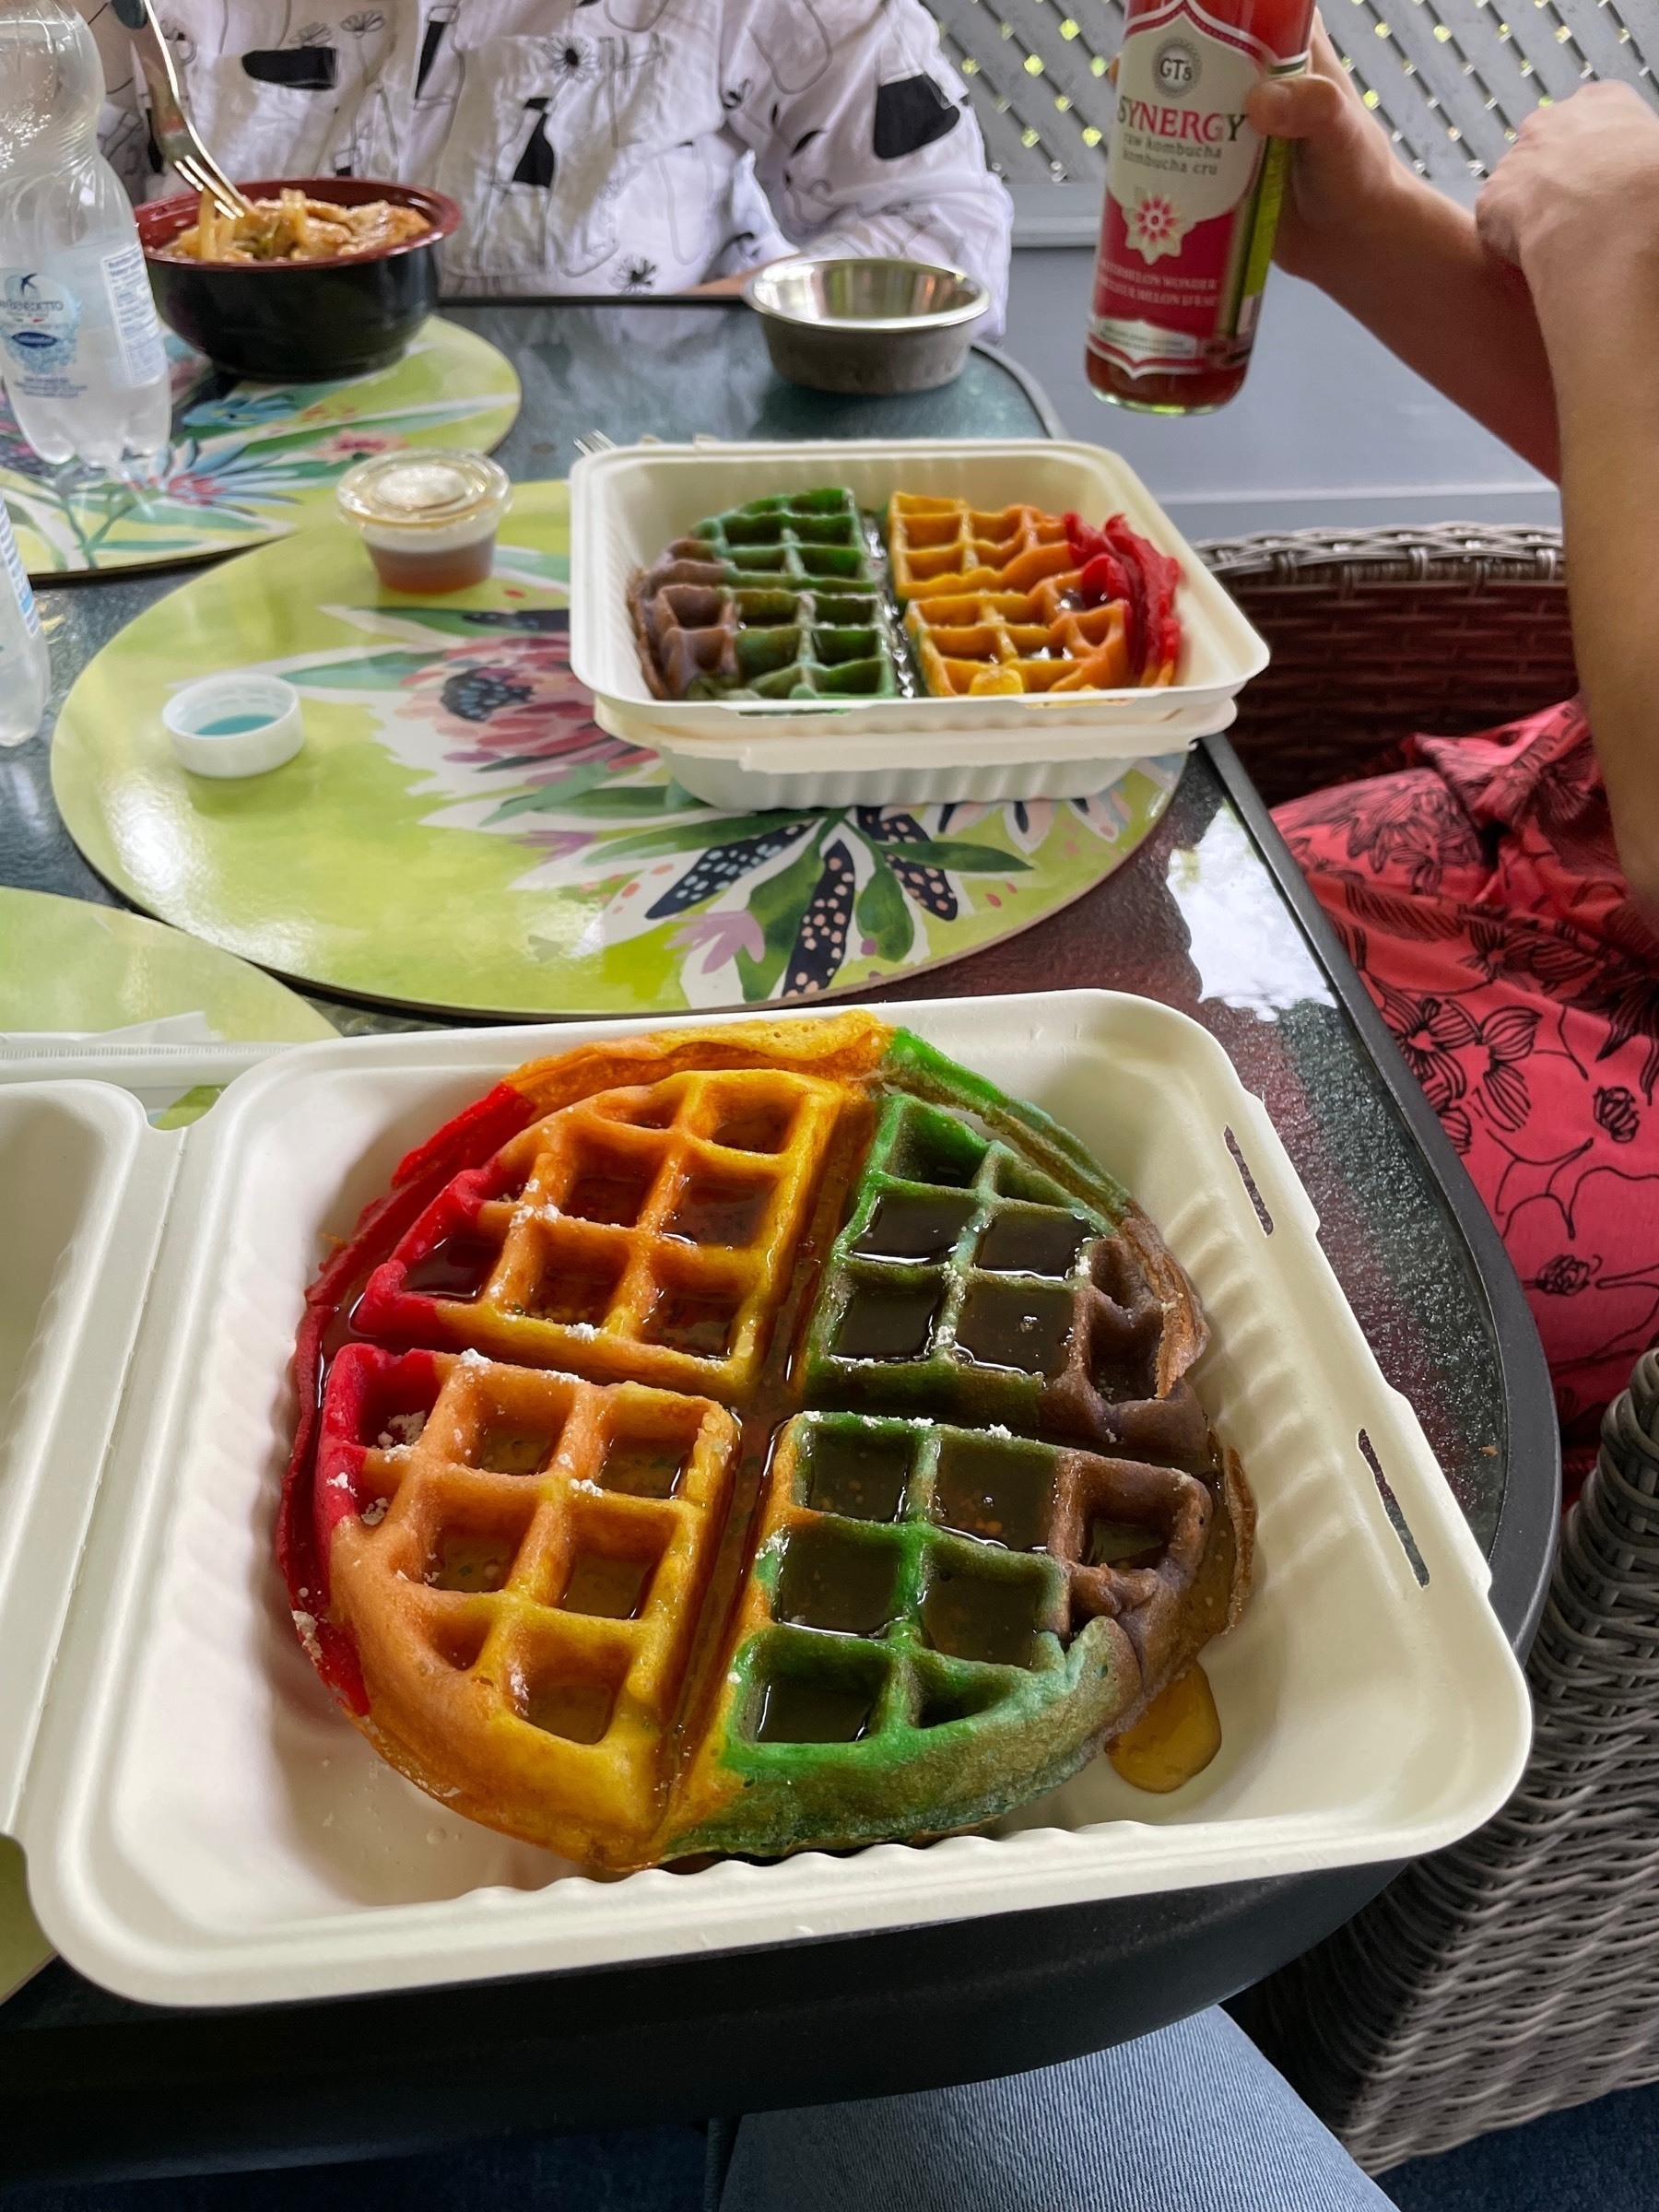 Two big waffles in take our containers that are coloured in a rainbow of red, yellow, green, and purple like a pride flag. Drizzled with delicious maple syrup.